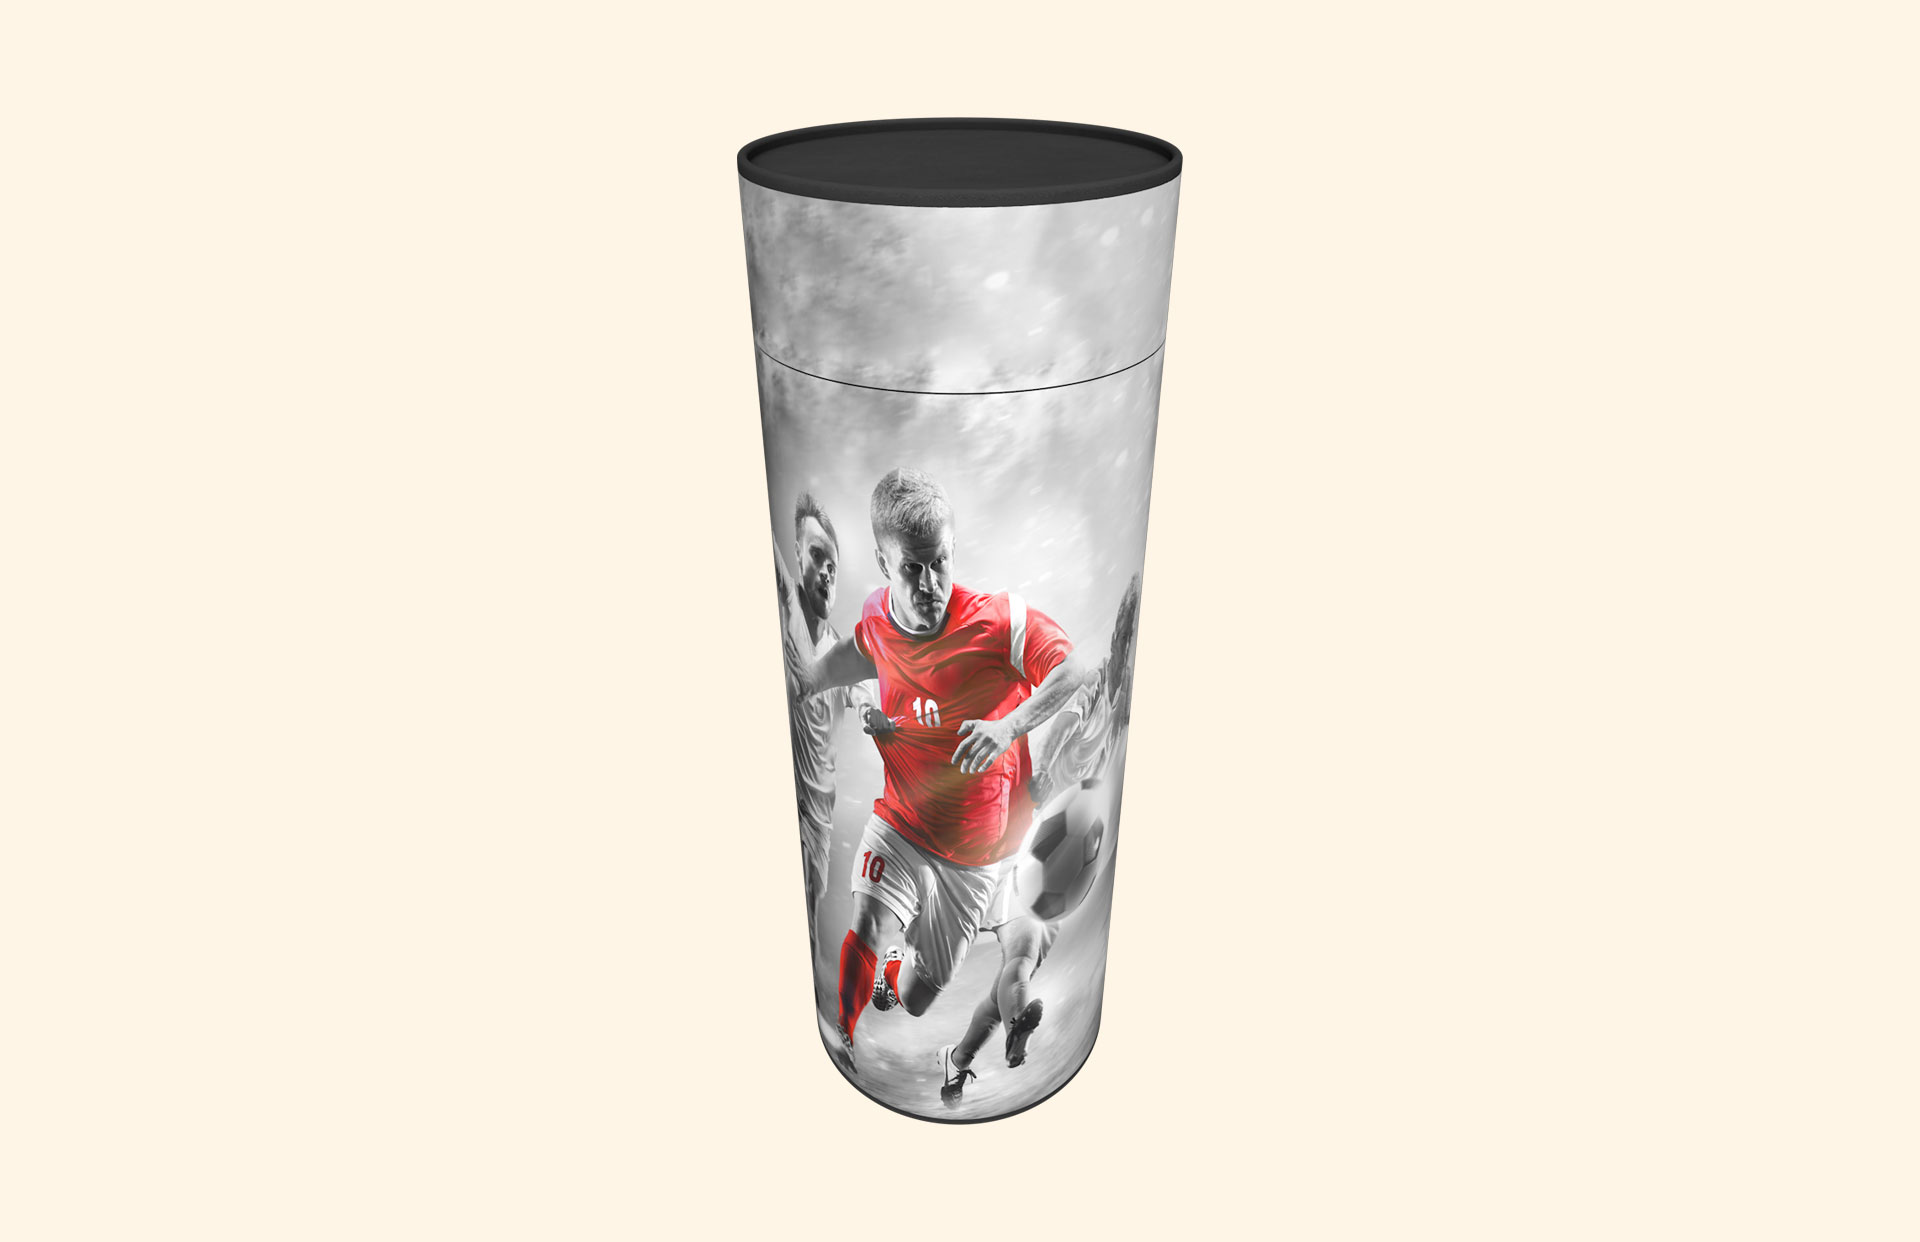 Standing Out Player in red scatter tube